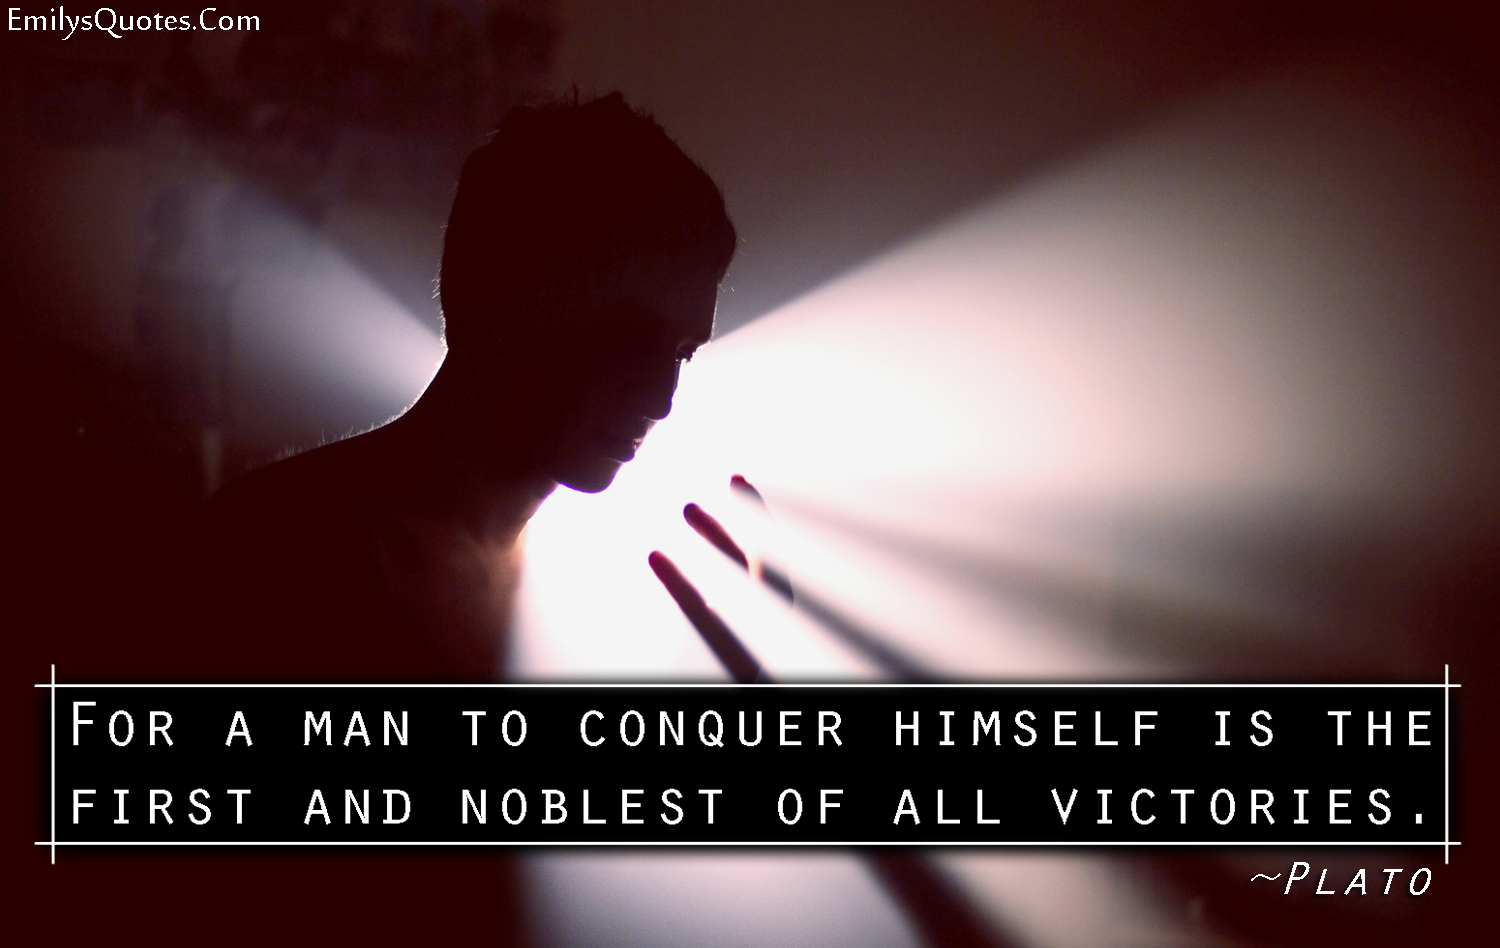 For a man to conquer himself is the first and noblest of all victories